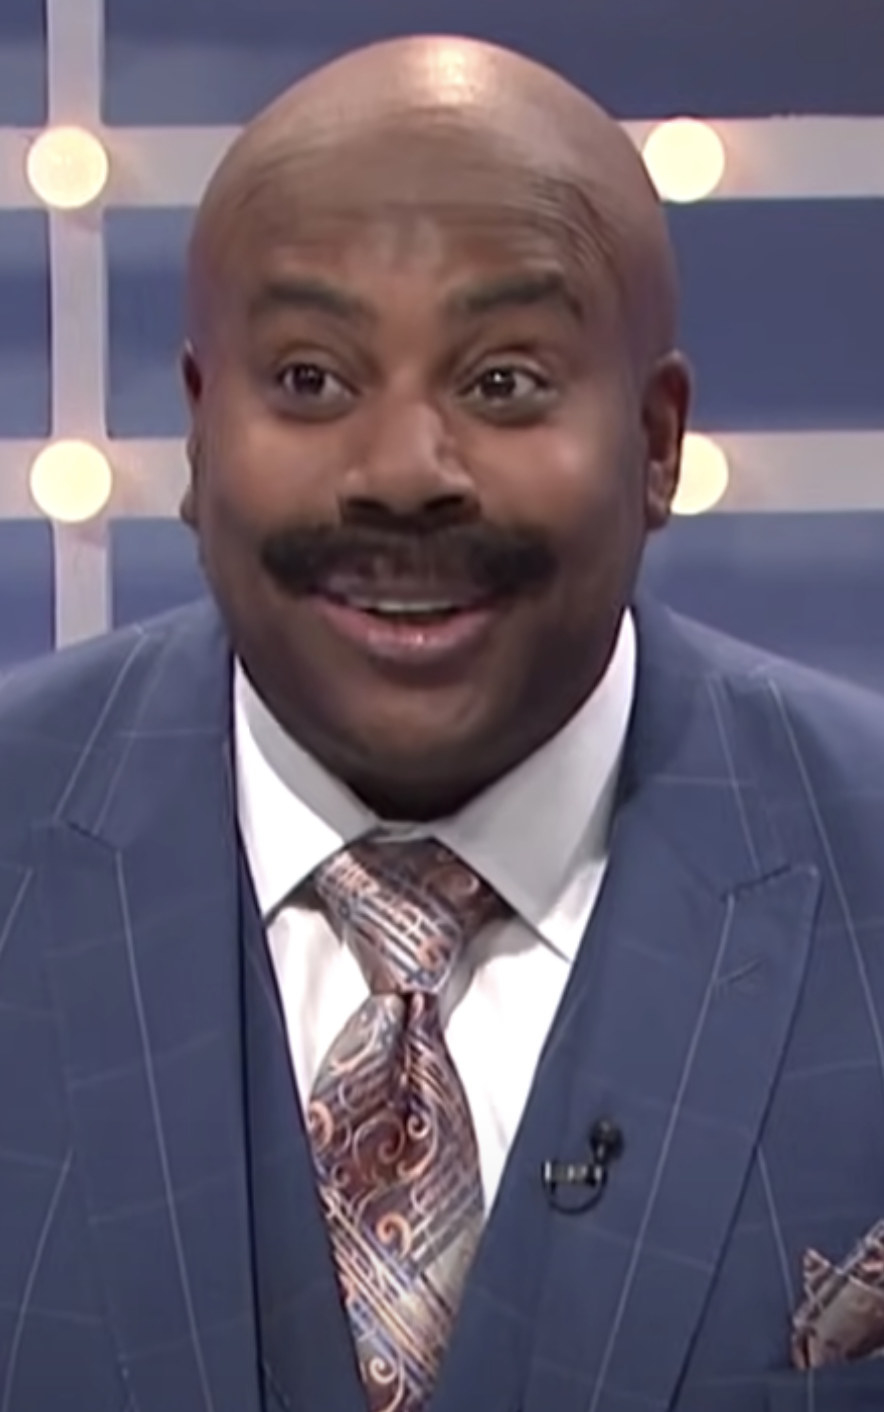 Thompson wearing a bald cap, mustache, and suit like Steve Harvey